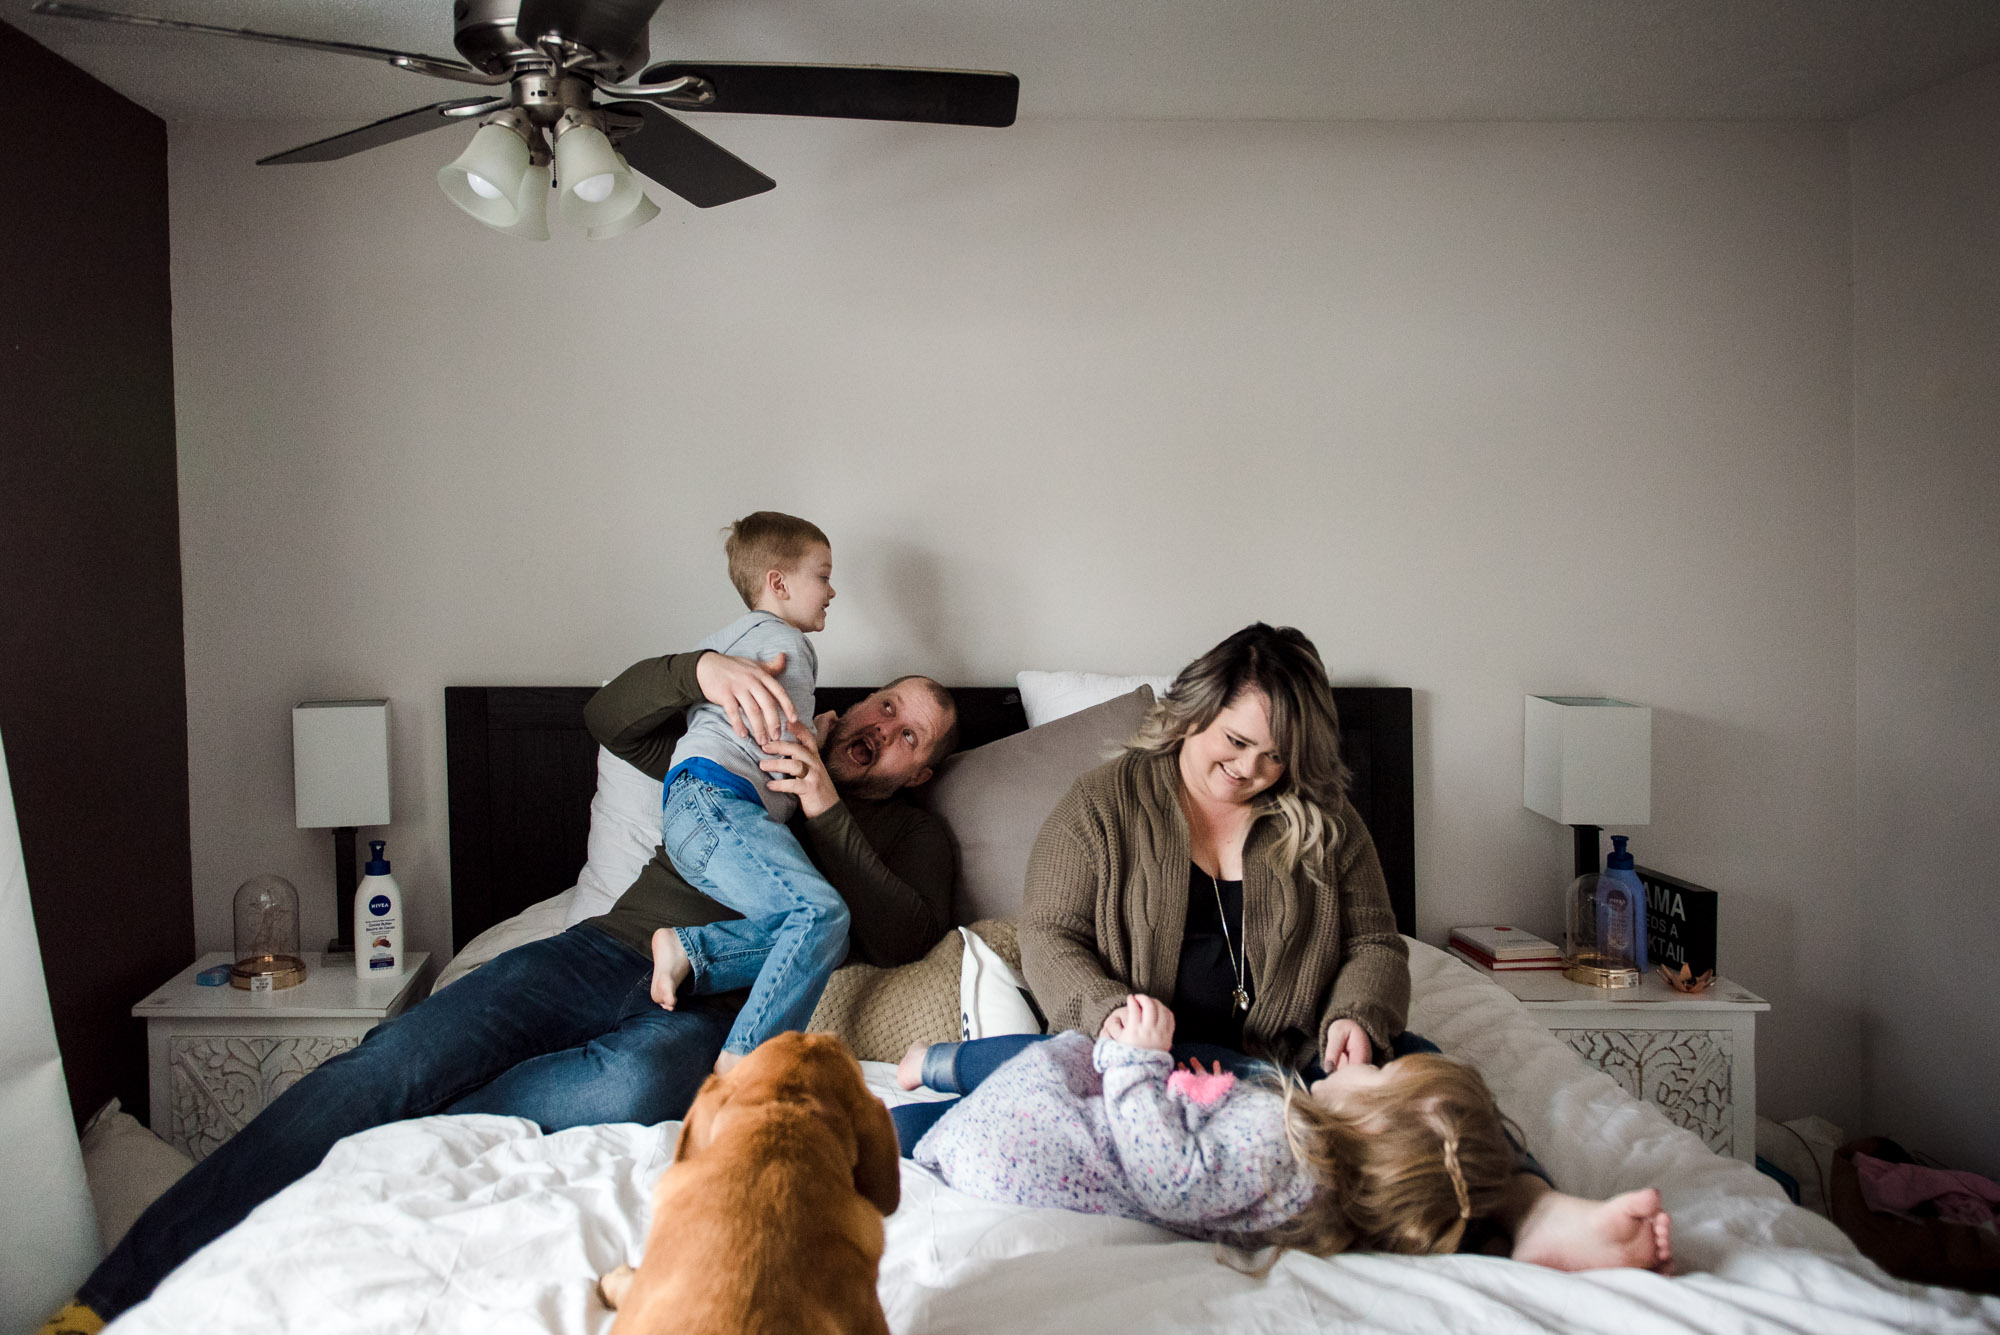 Fiddle Leaf Photography, one of the best family photographers in sherwood park captures natural joy as a family wrestles